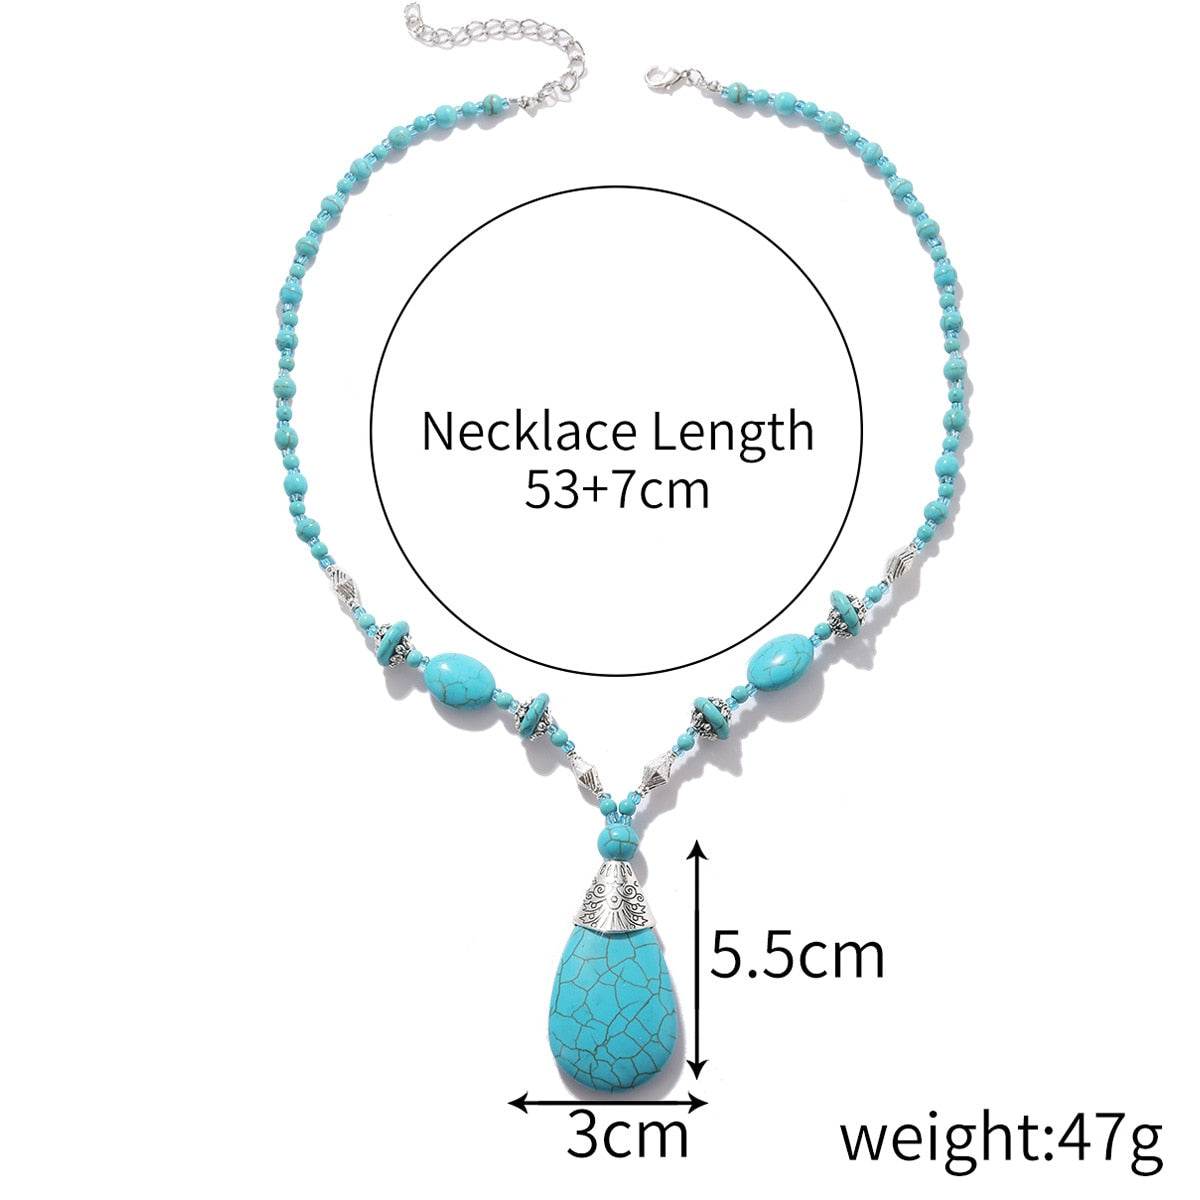 Ethnic Style Long Natural Turquoise Pendant Necklace Occidental Bohemian Necklace Holiday Fashion Party Jewelry Gift Accessories